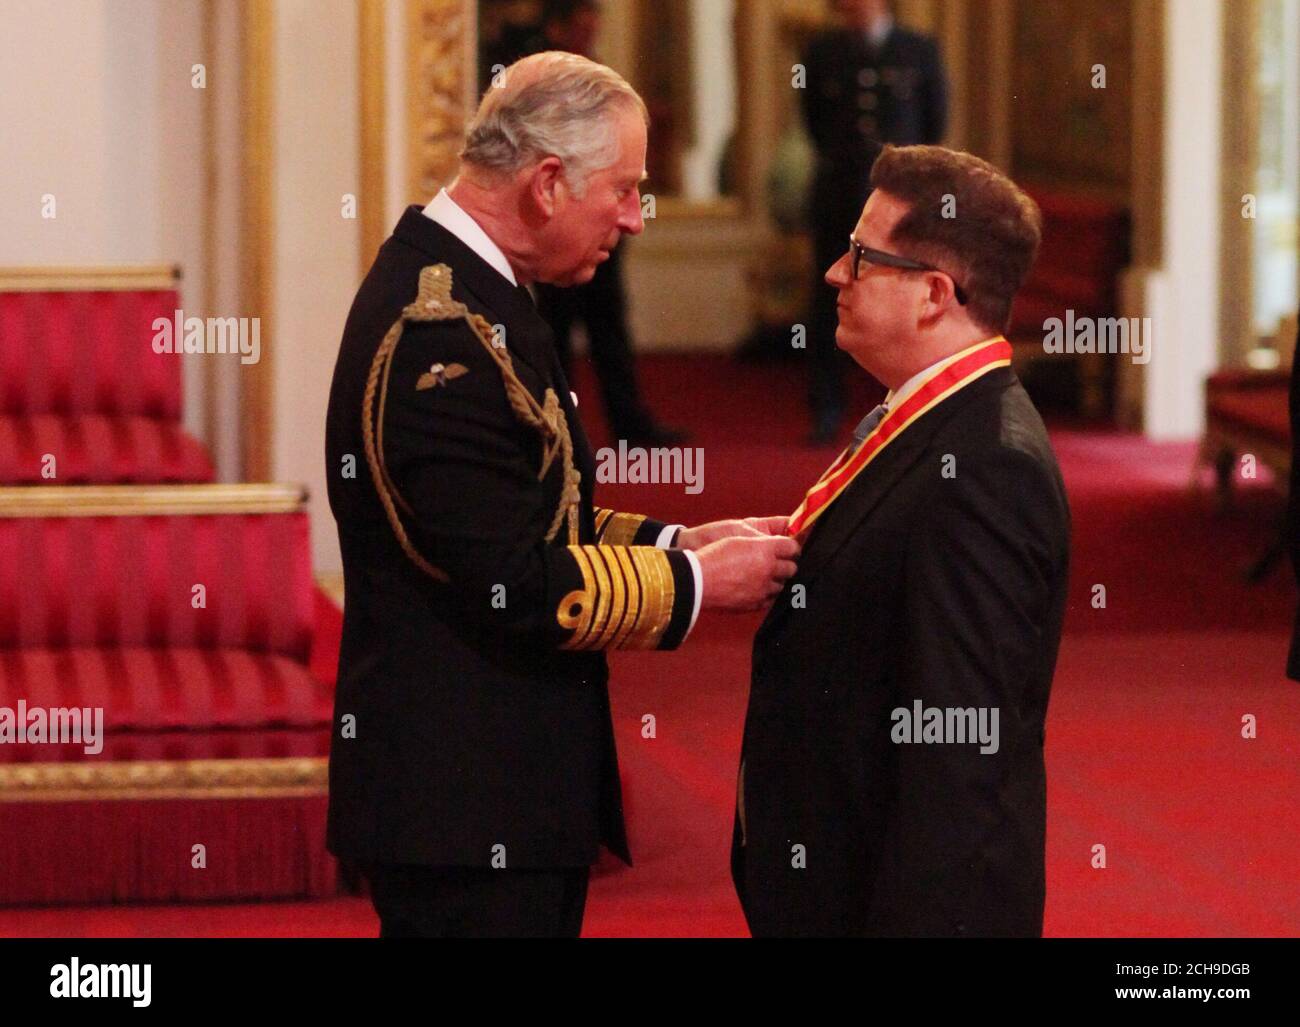 Sir Matthew Bourne from London is made a Knight Bachelor of the British Empire by the Prince of Wales at an investiture ceremony at Buckingham Palace, London. Stock Photo